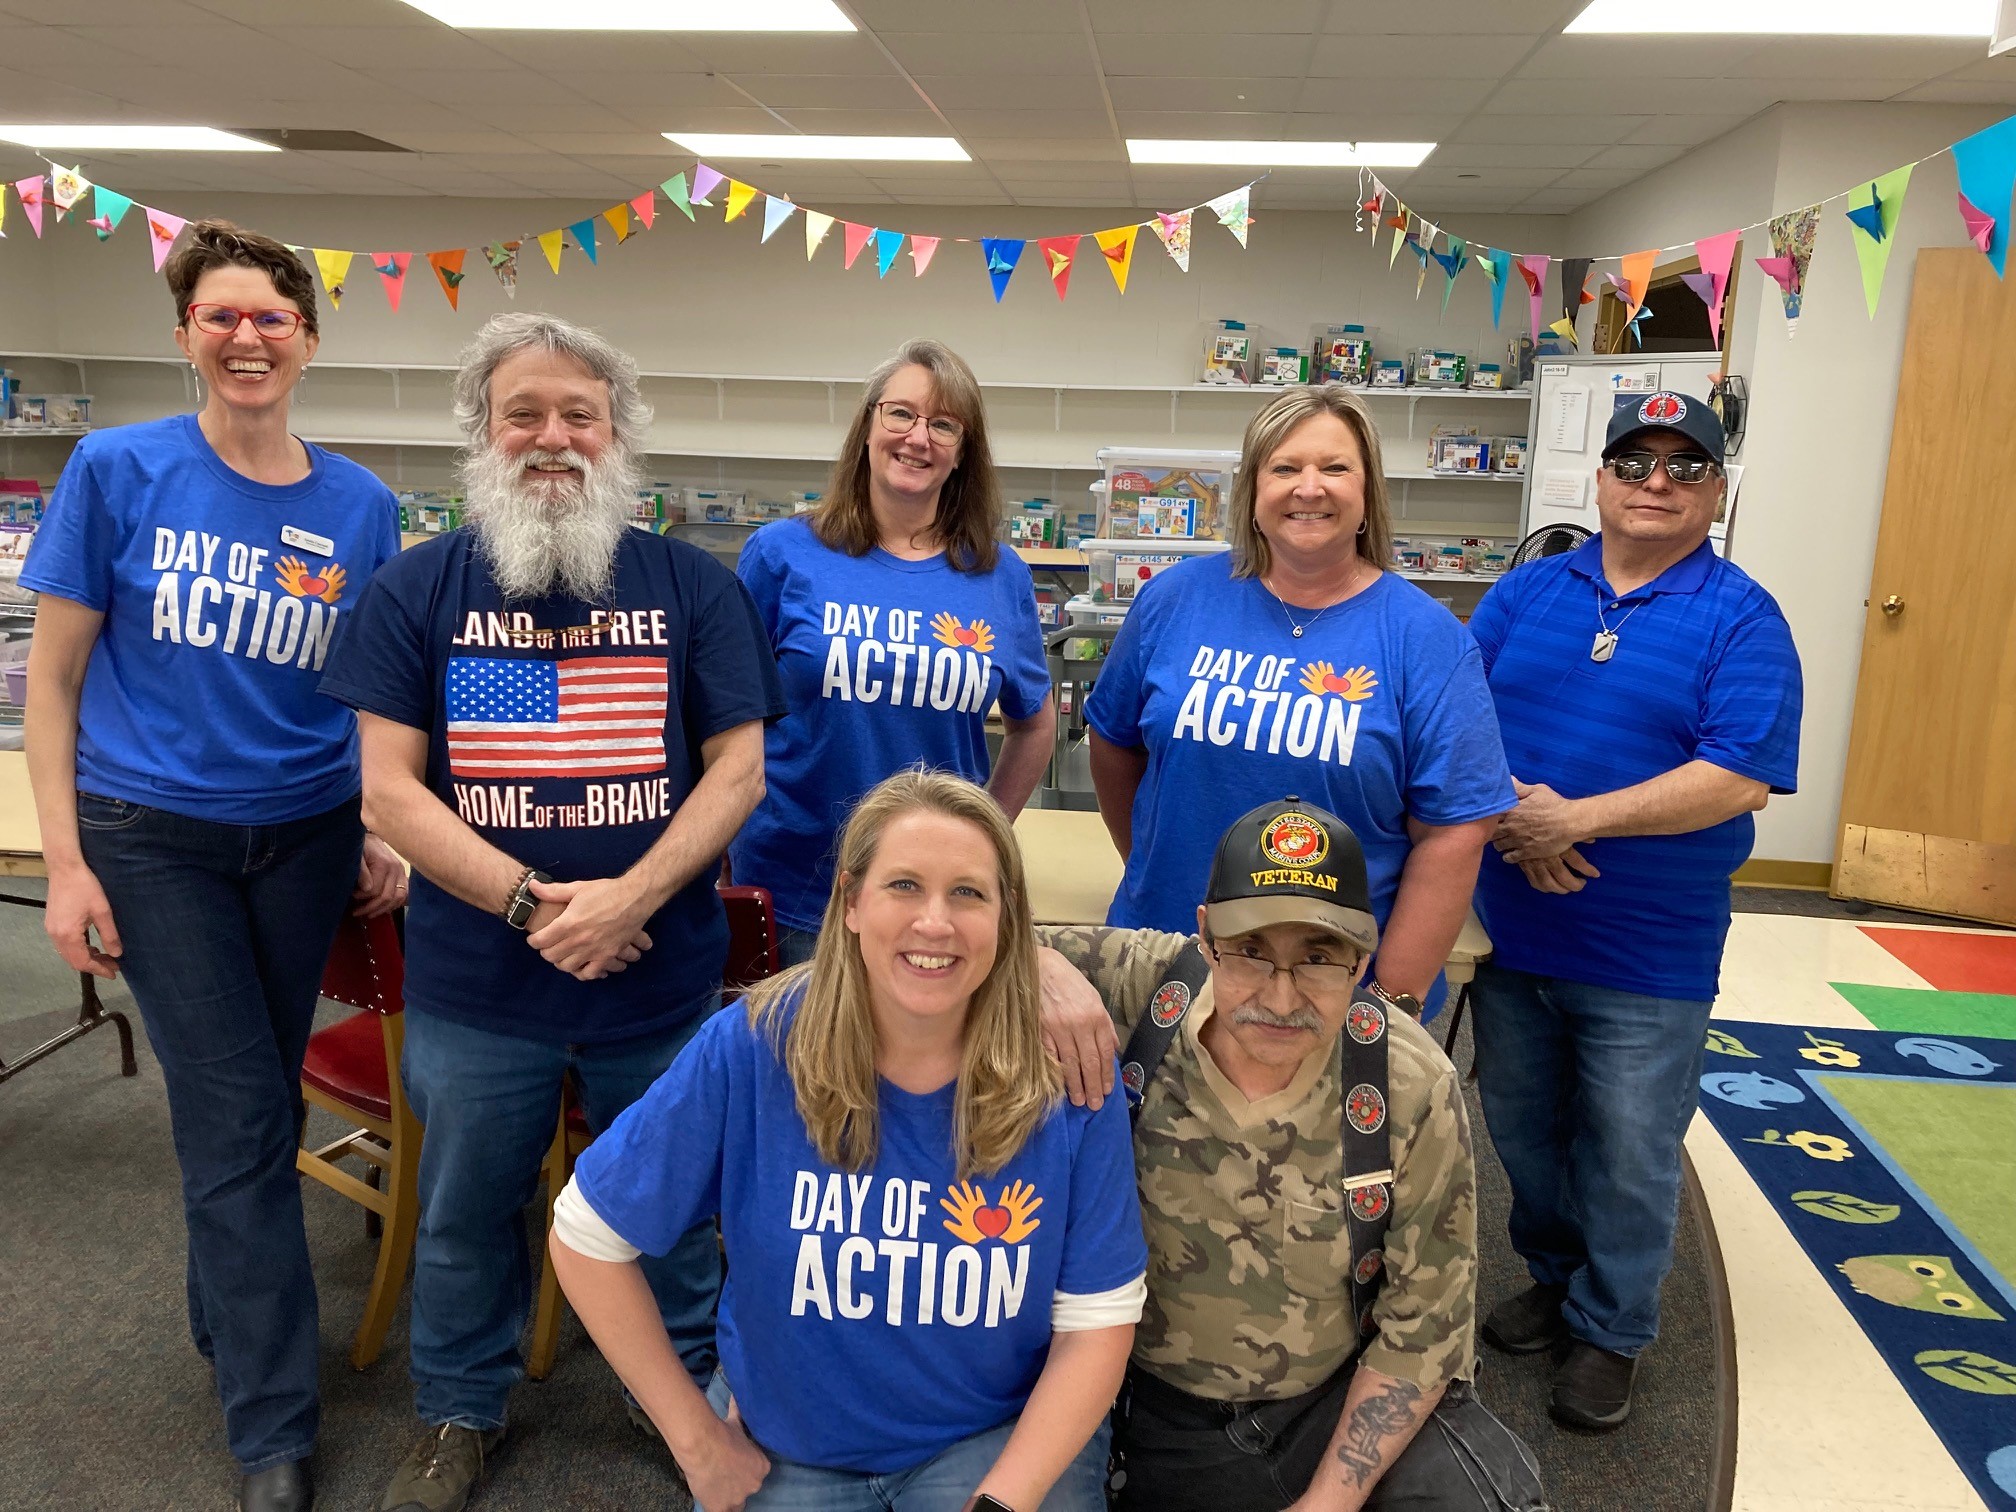 Adrienne McKeown and five other volunteers posing with Coscioni at Toy Lending Library wearing Day of Action shirts. 